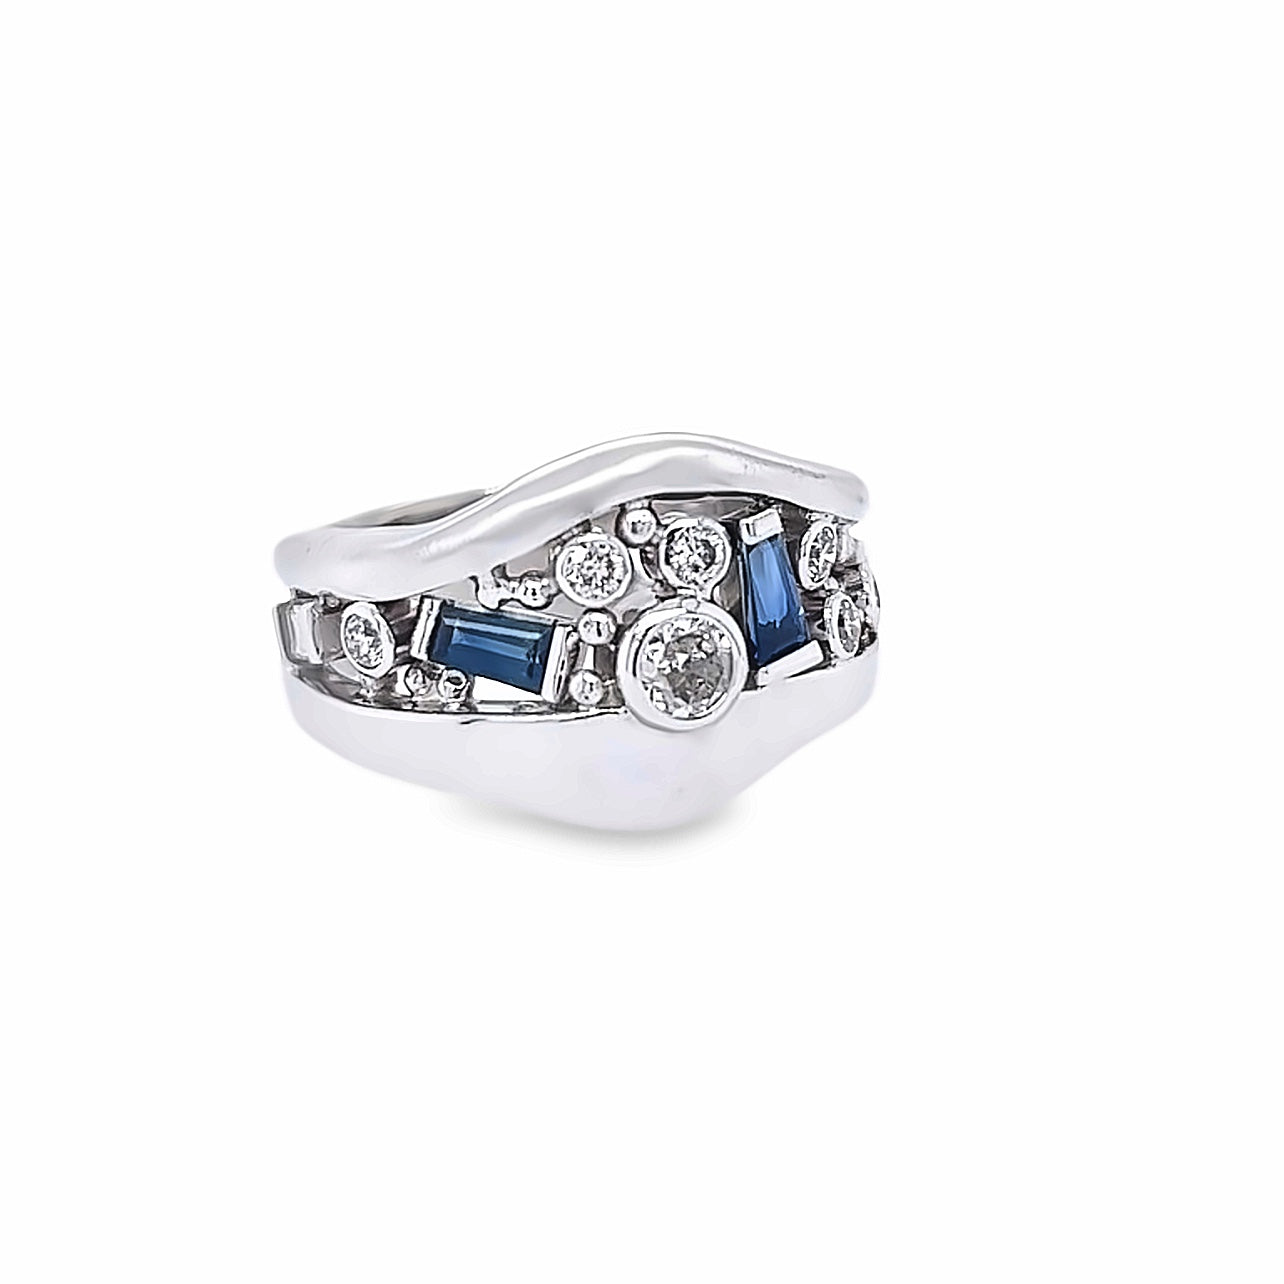 Custom 14k White Gold Round Diamond and Sapphire River Ring by Paul Richter